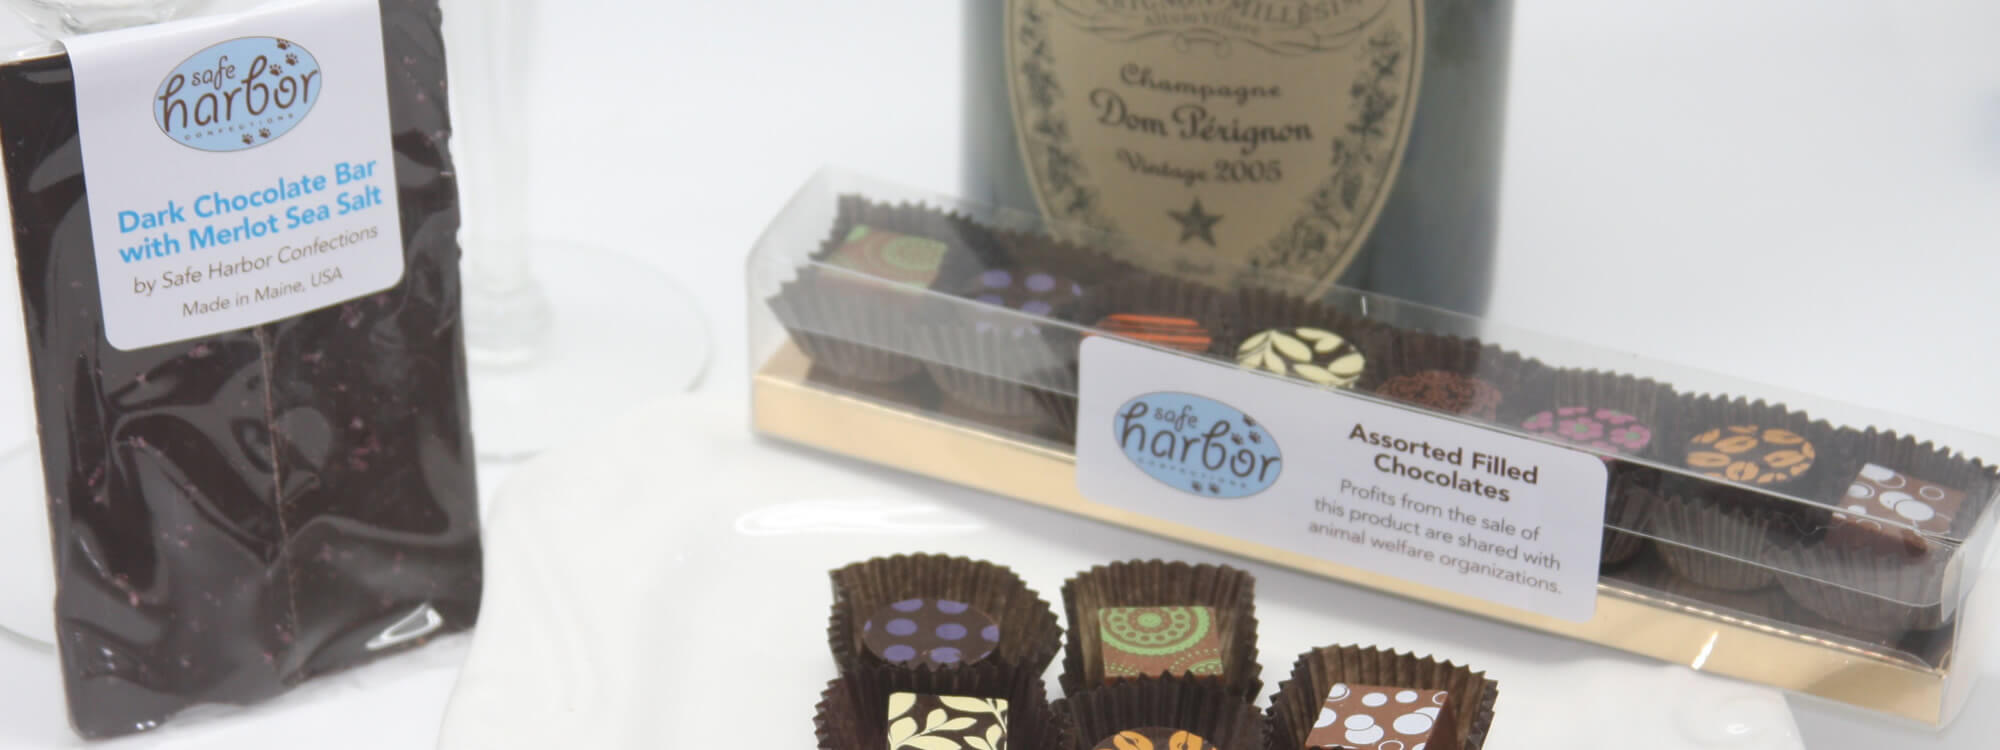 Banner featuring assorted filled chocolates and dark chocolate with merlot sea salt created by Safe Harbor Confections.